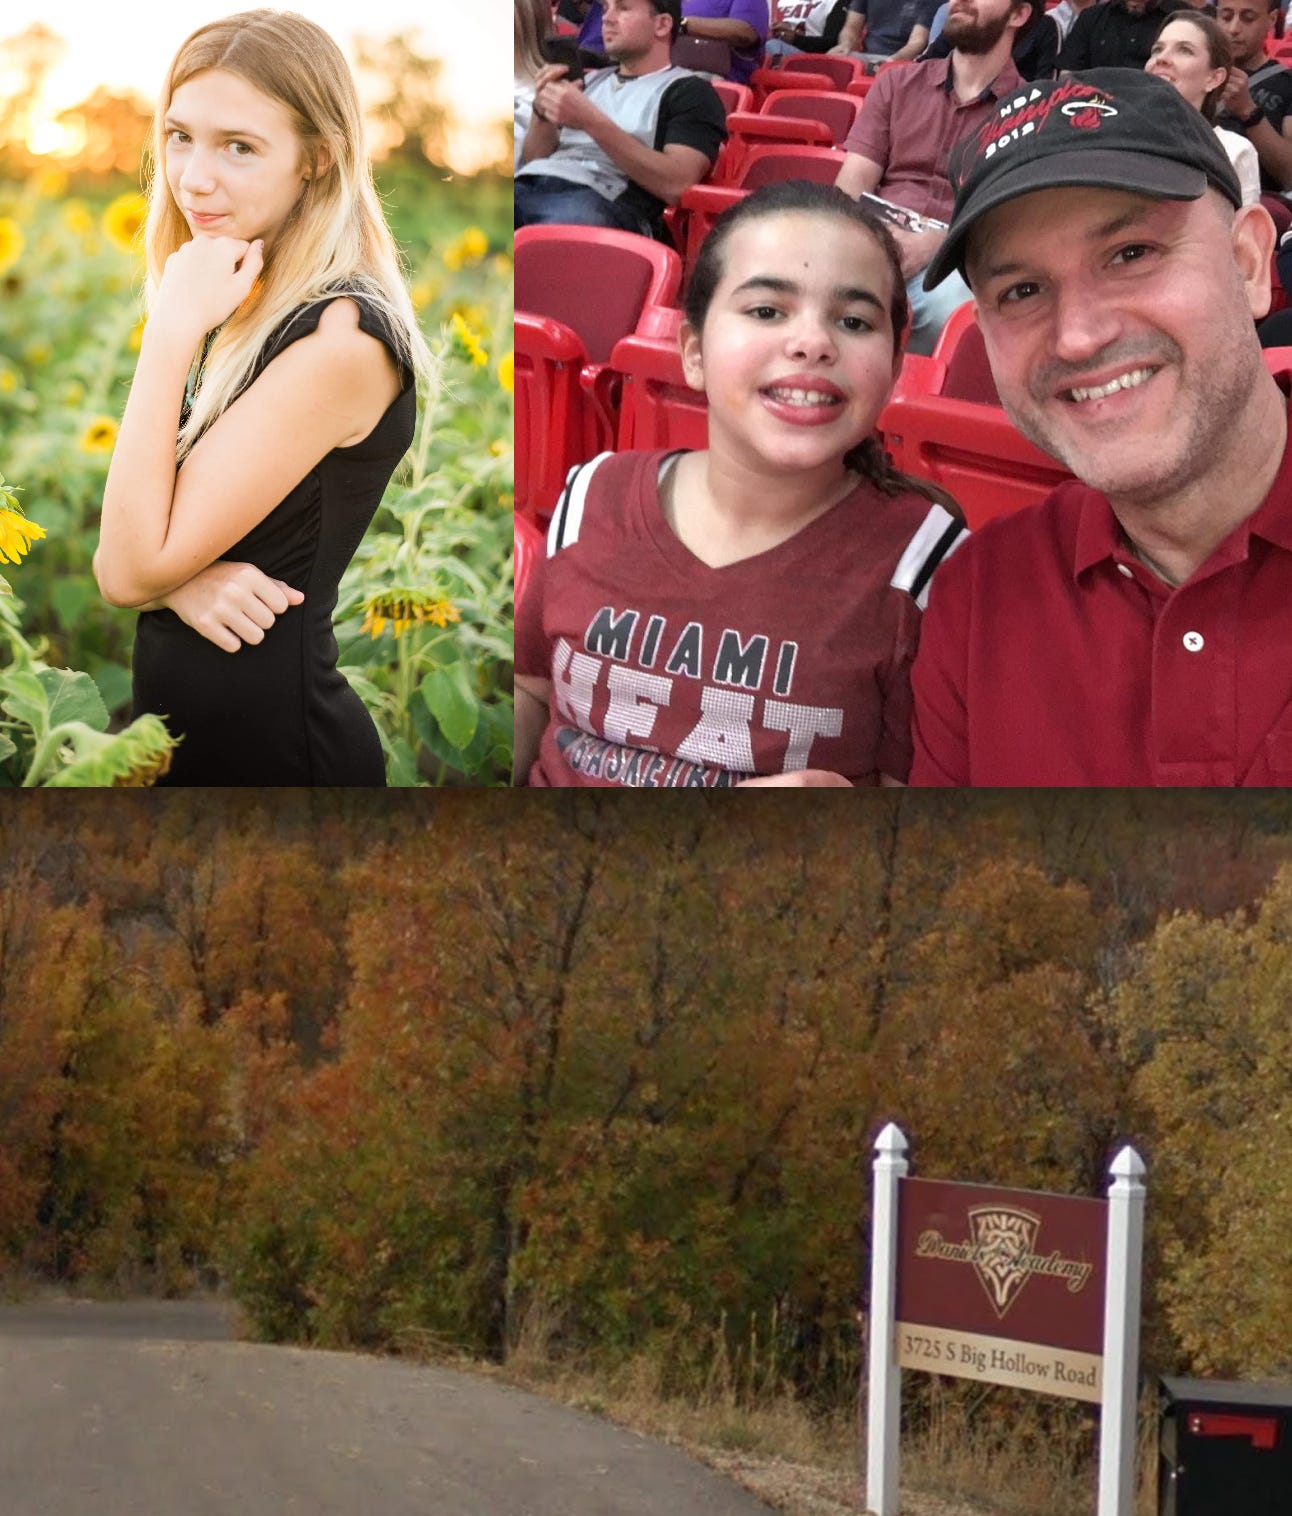 Three photographs, 1) a blond girl in a black dress in a field of sunflowers, 2) a young girl in a Miami Heat shirt, setting the stands of a sports arena and 3) a street heading downhill into the trees, with a sign saying "DANIELS ACADEMY" and mailbox in the foreground